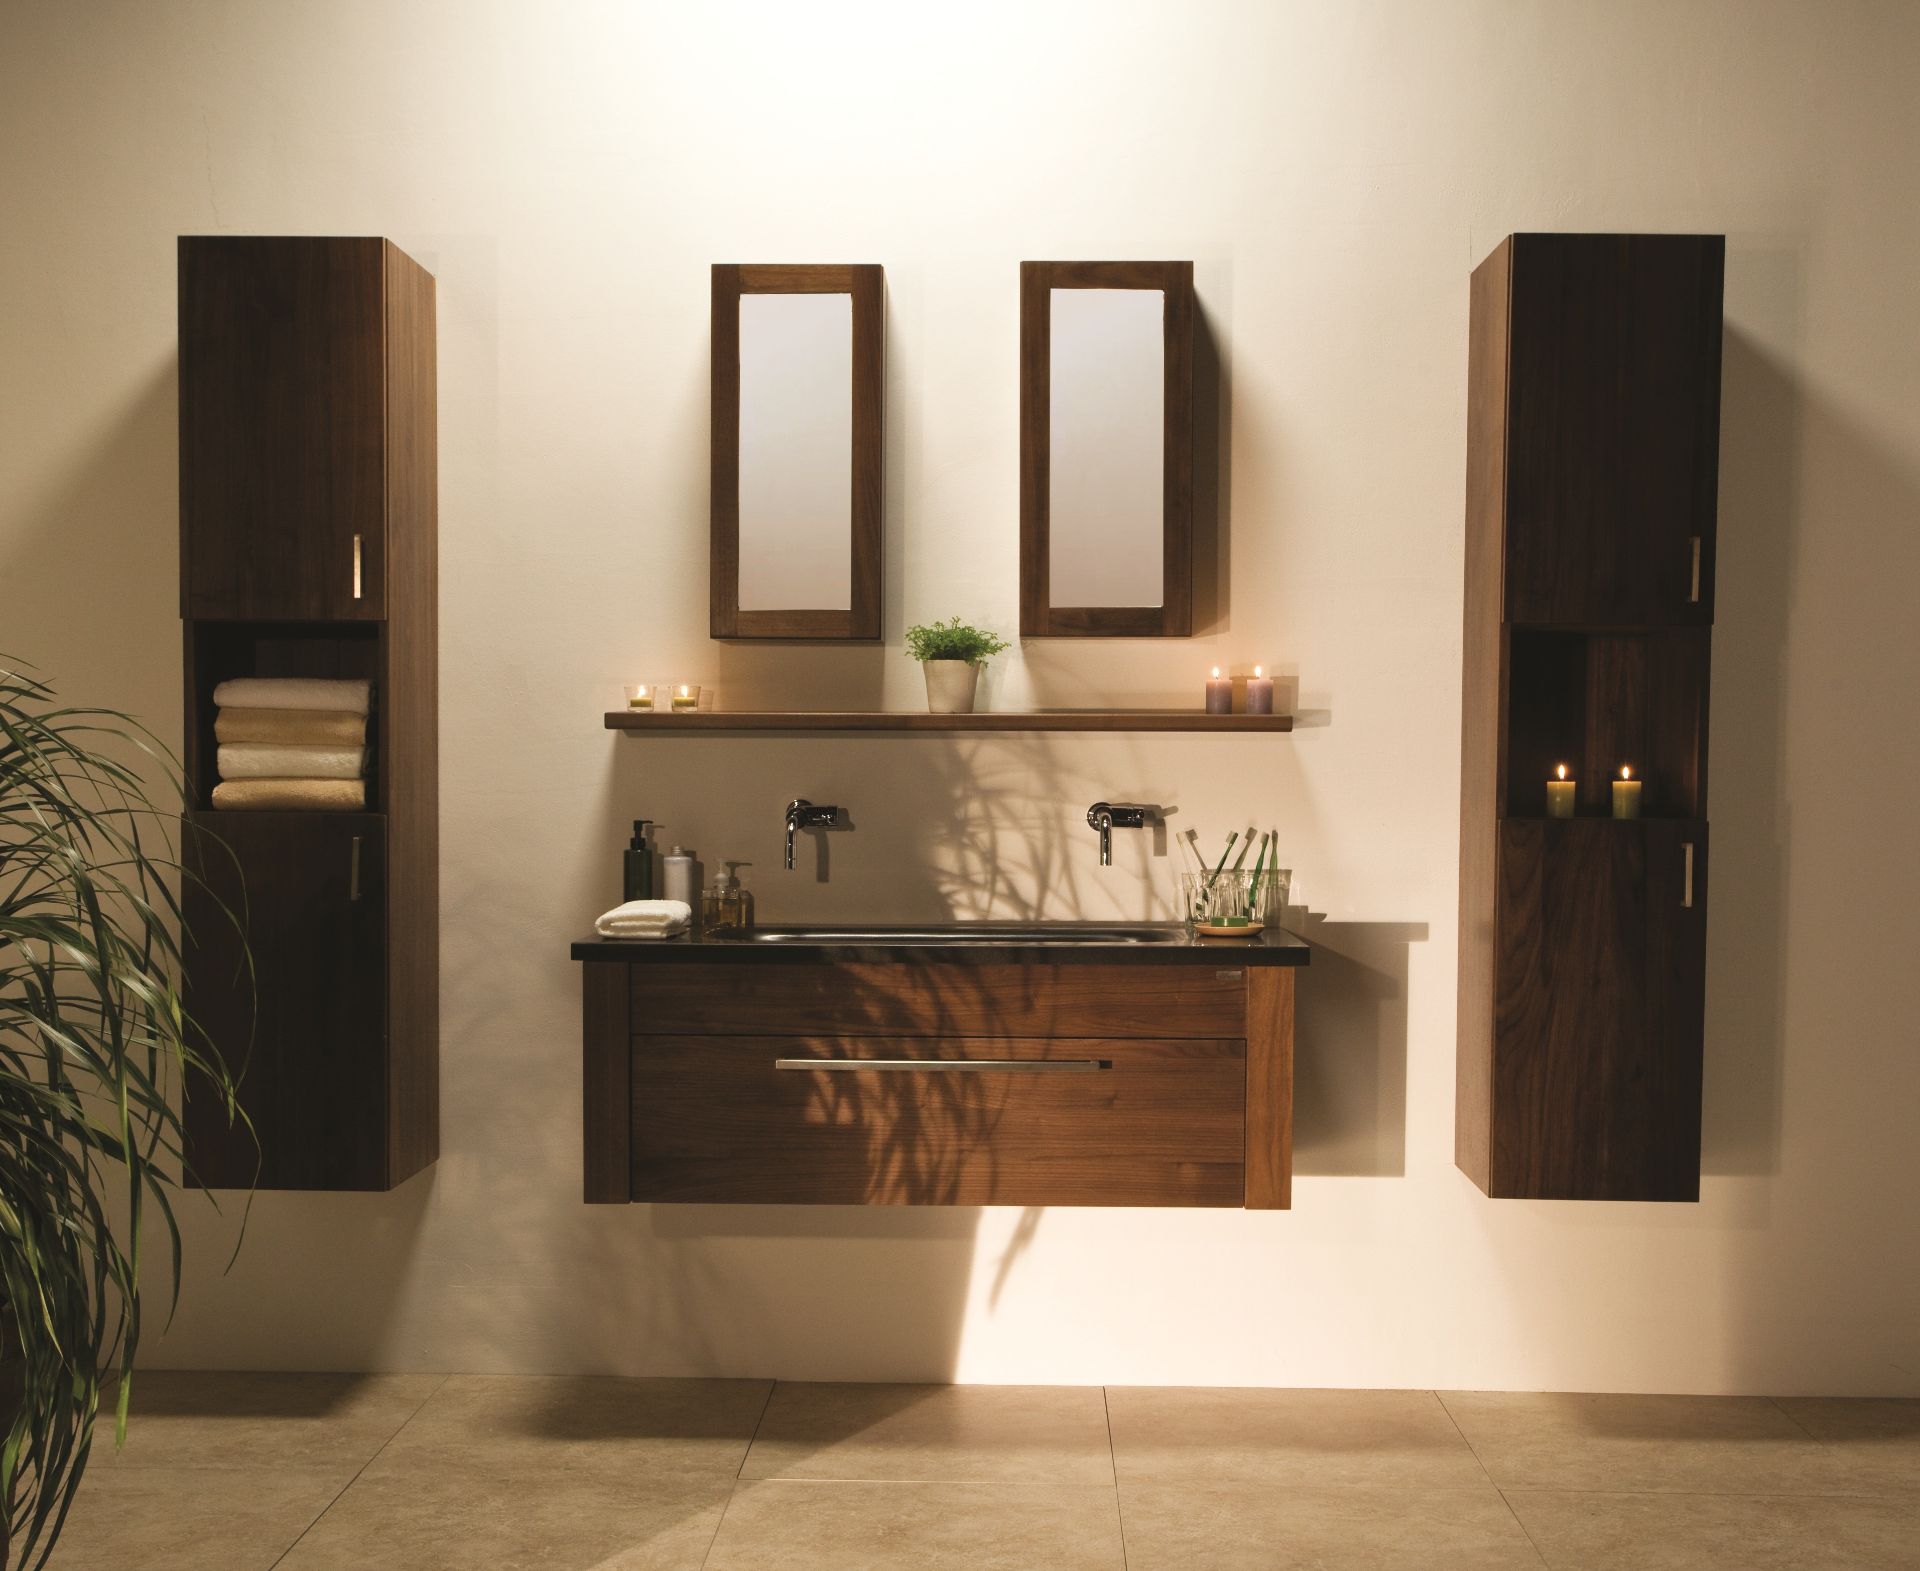 1 x Stonearth Bathroom Storage Shelf With Concealed Brackets - American Solid Walnut - Size: 300mm - Image 5 of 19